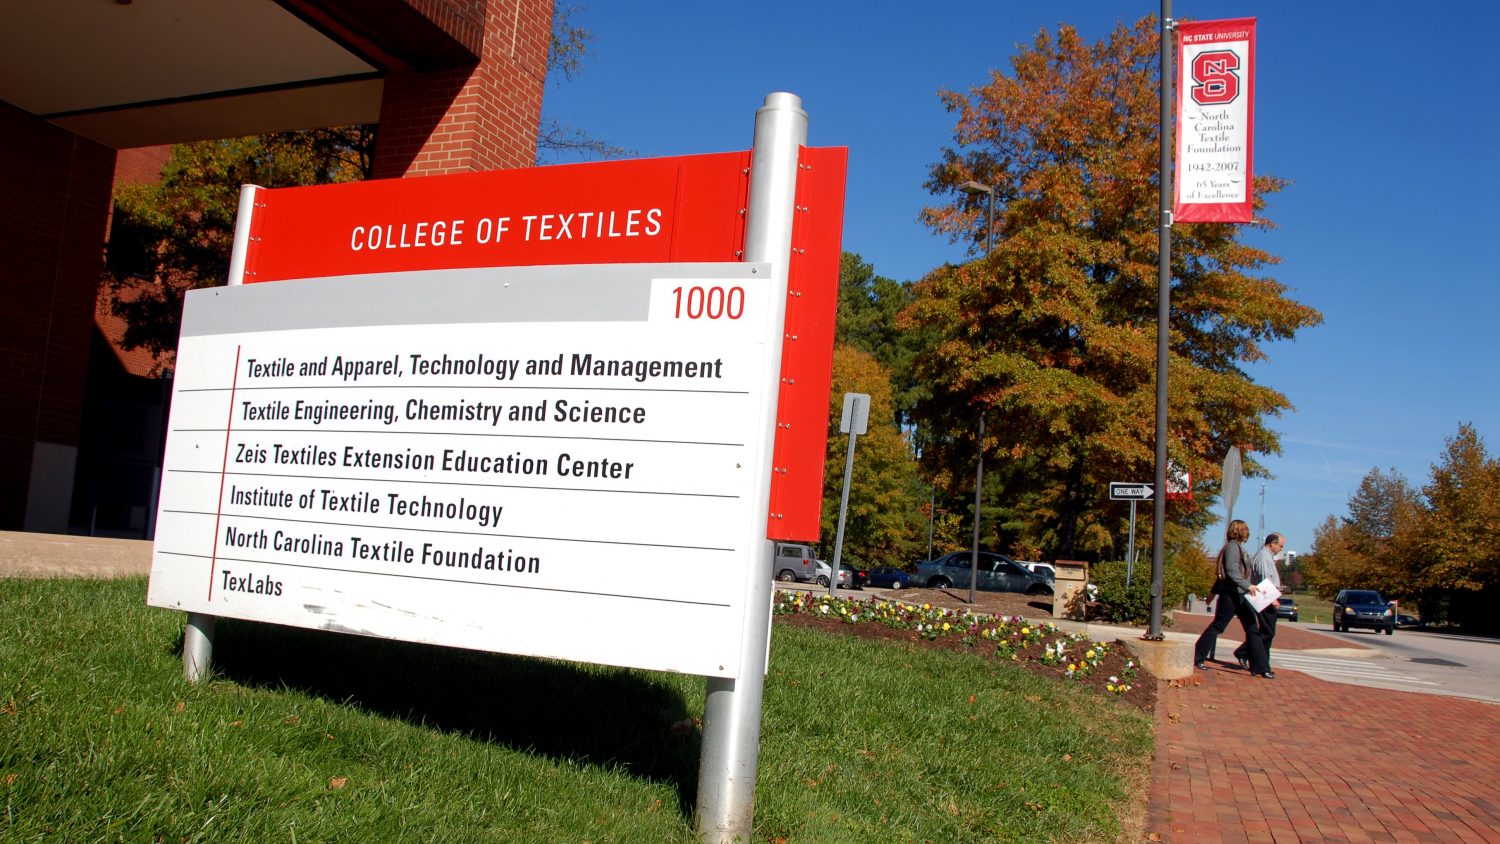 exterior building sign for the College of Textiles